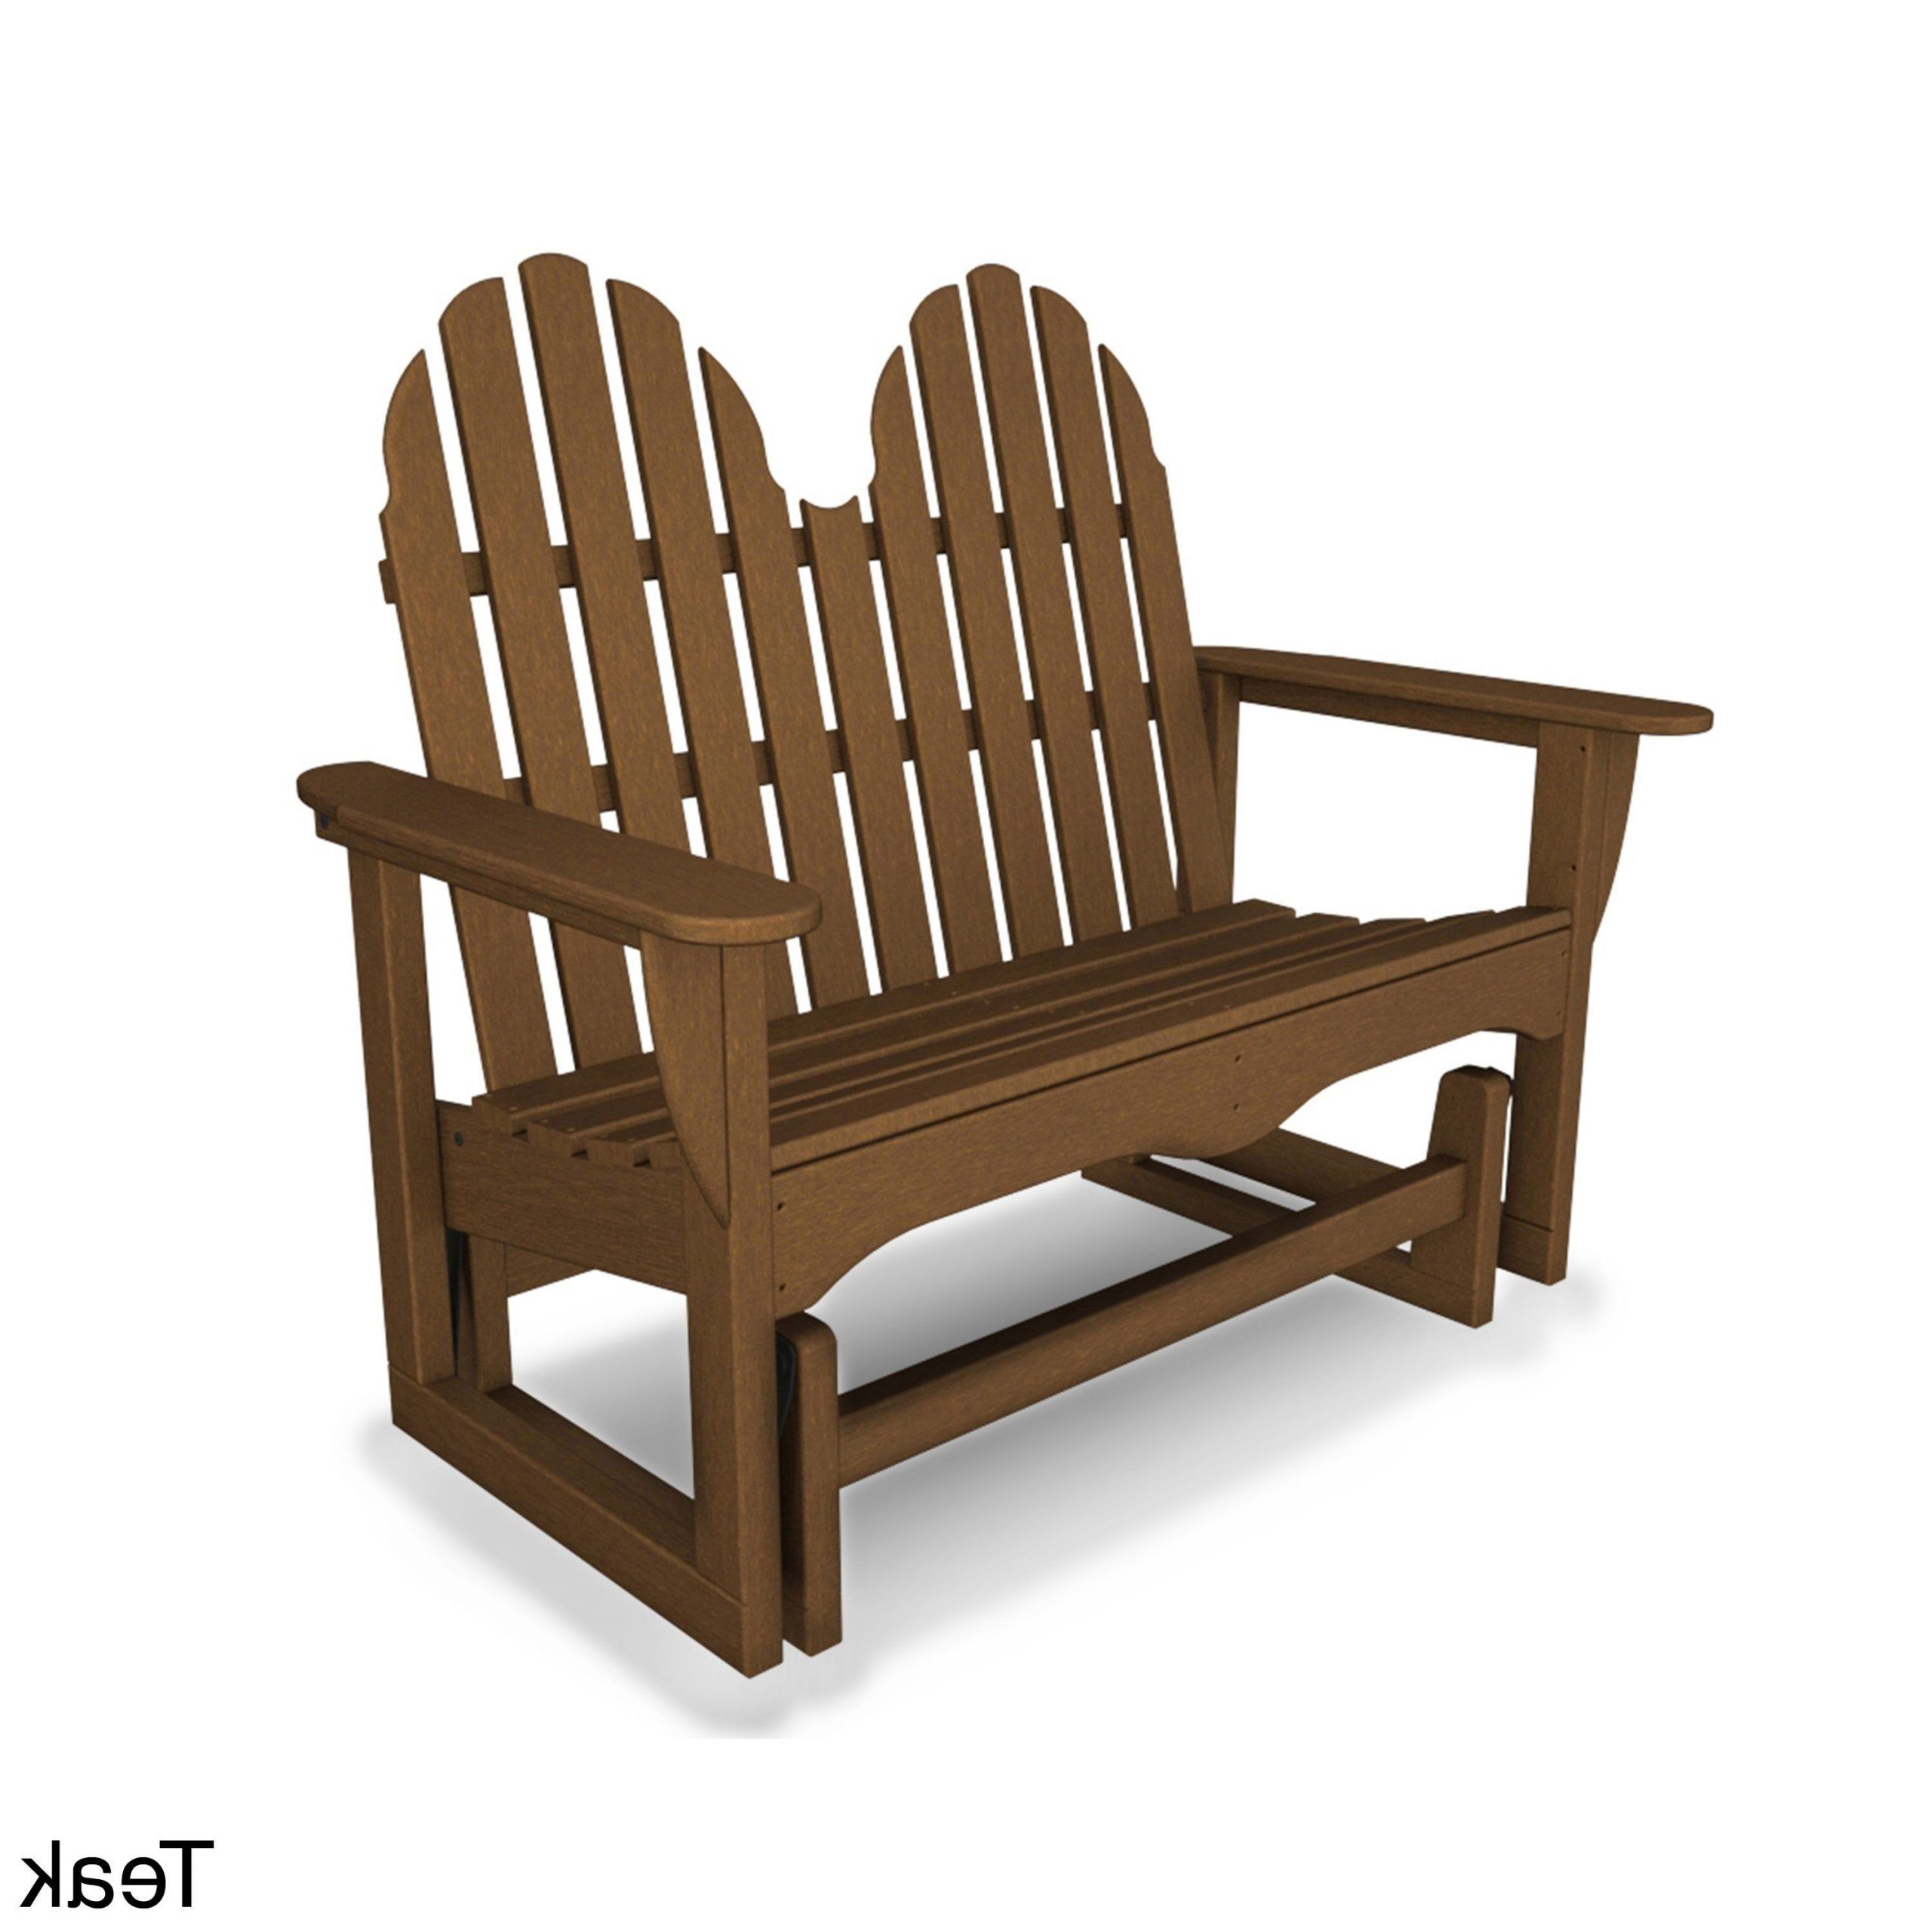 Latest Classic Adirondack 48 Inch Glider (teak), Brown, Patio Intended For Teak Outdoor Glider Benches (View 21 of 30)